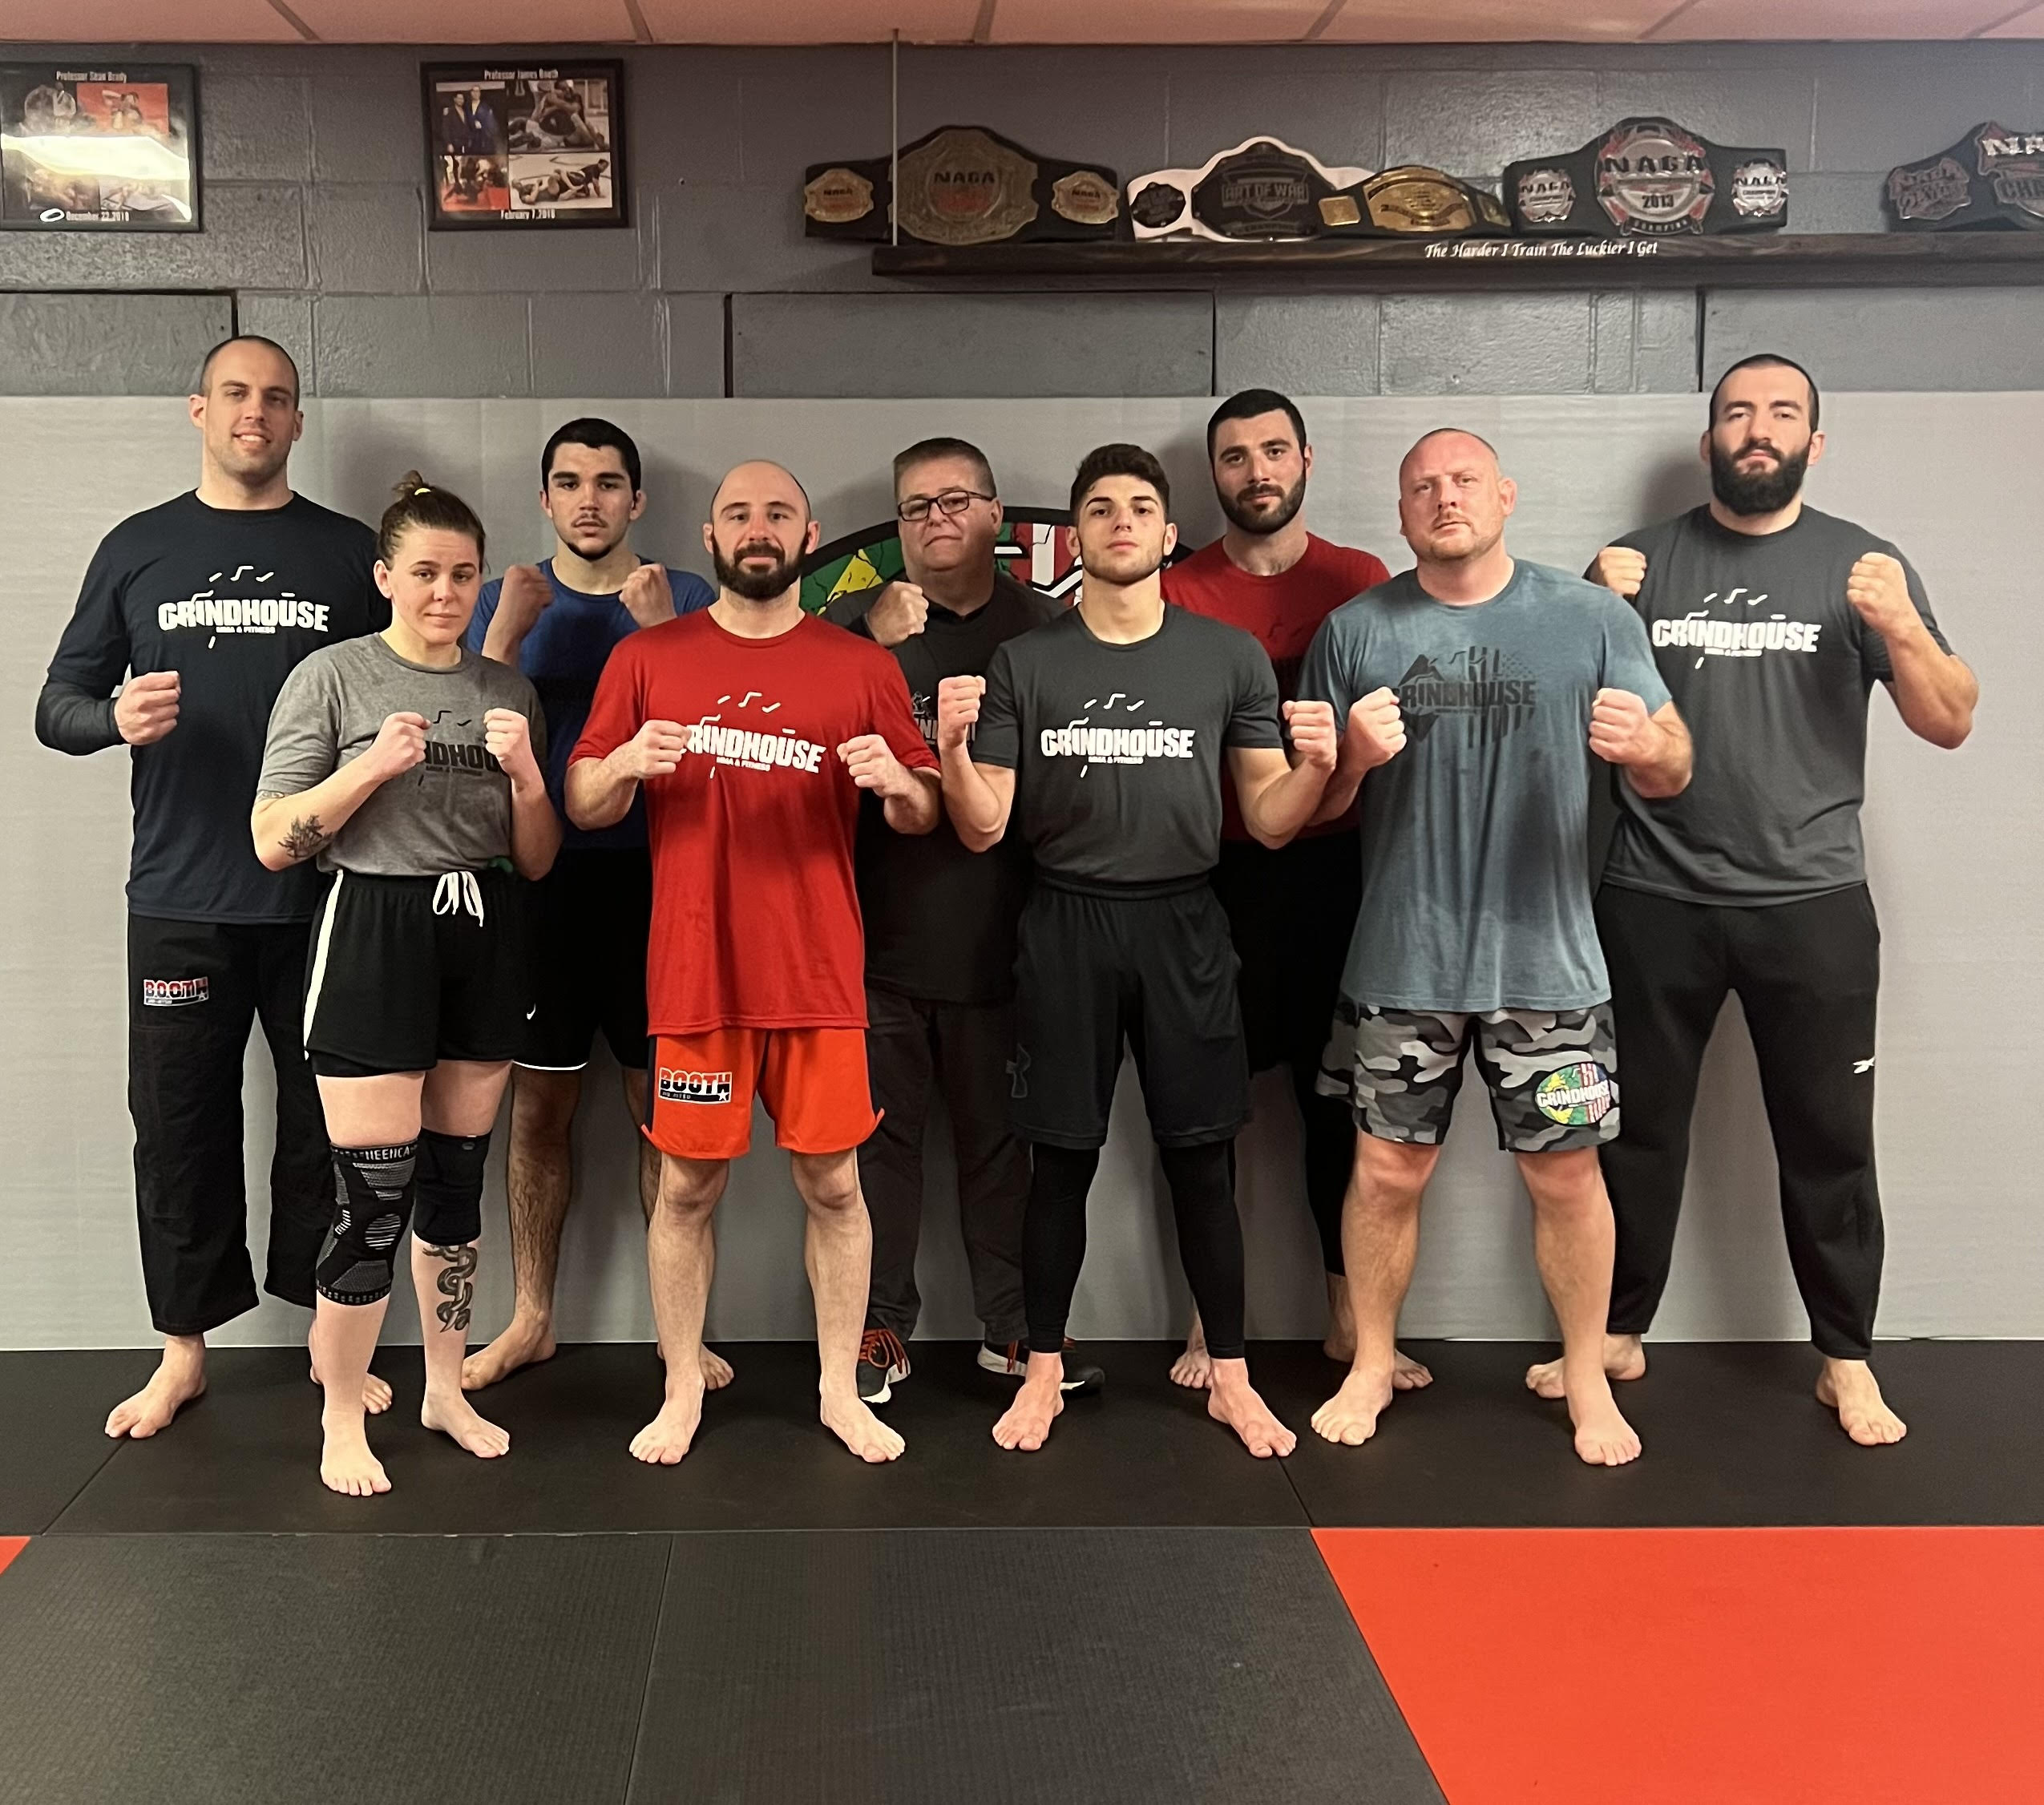 New Fight Team Group